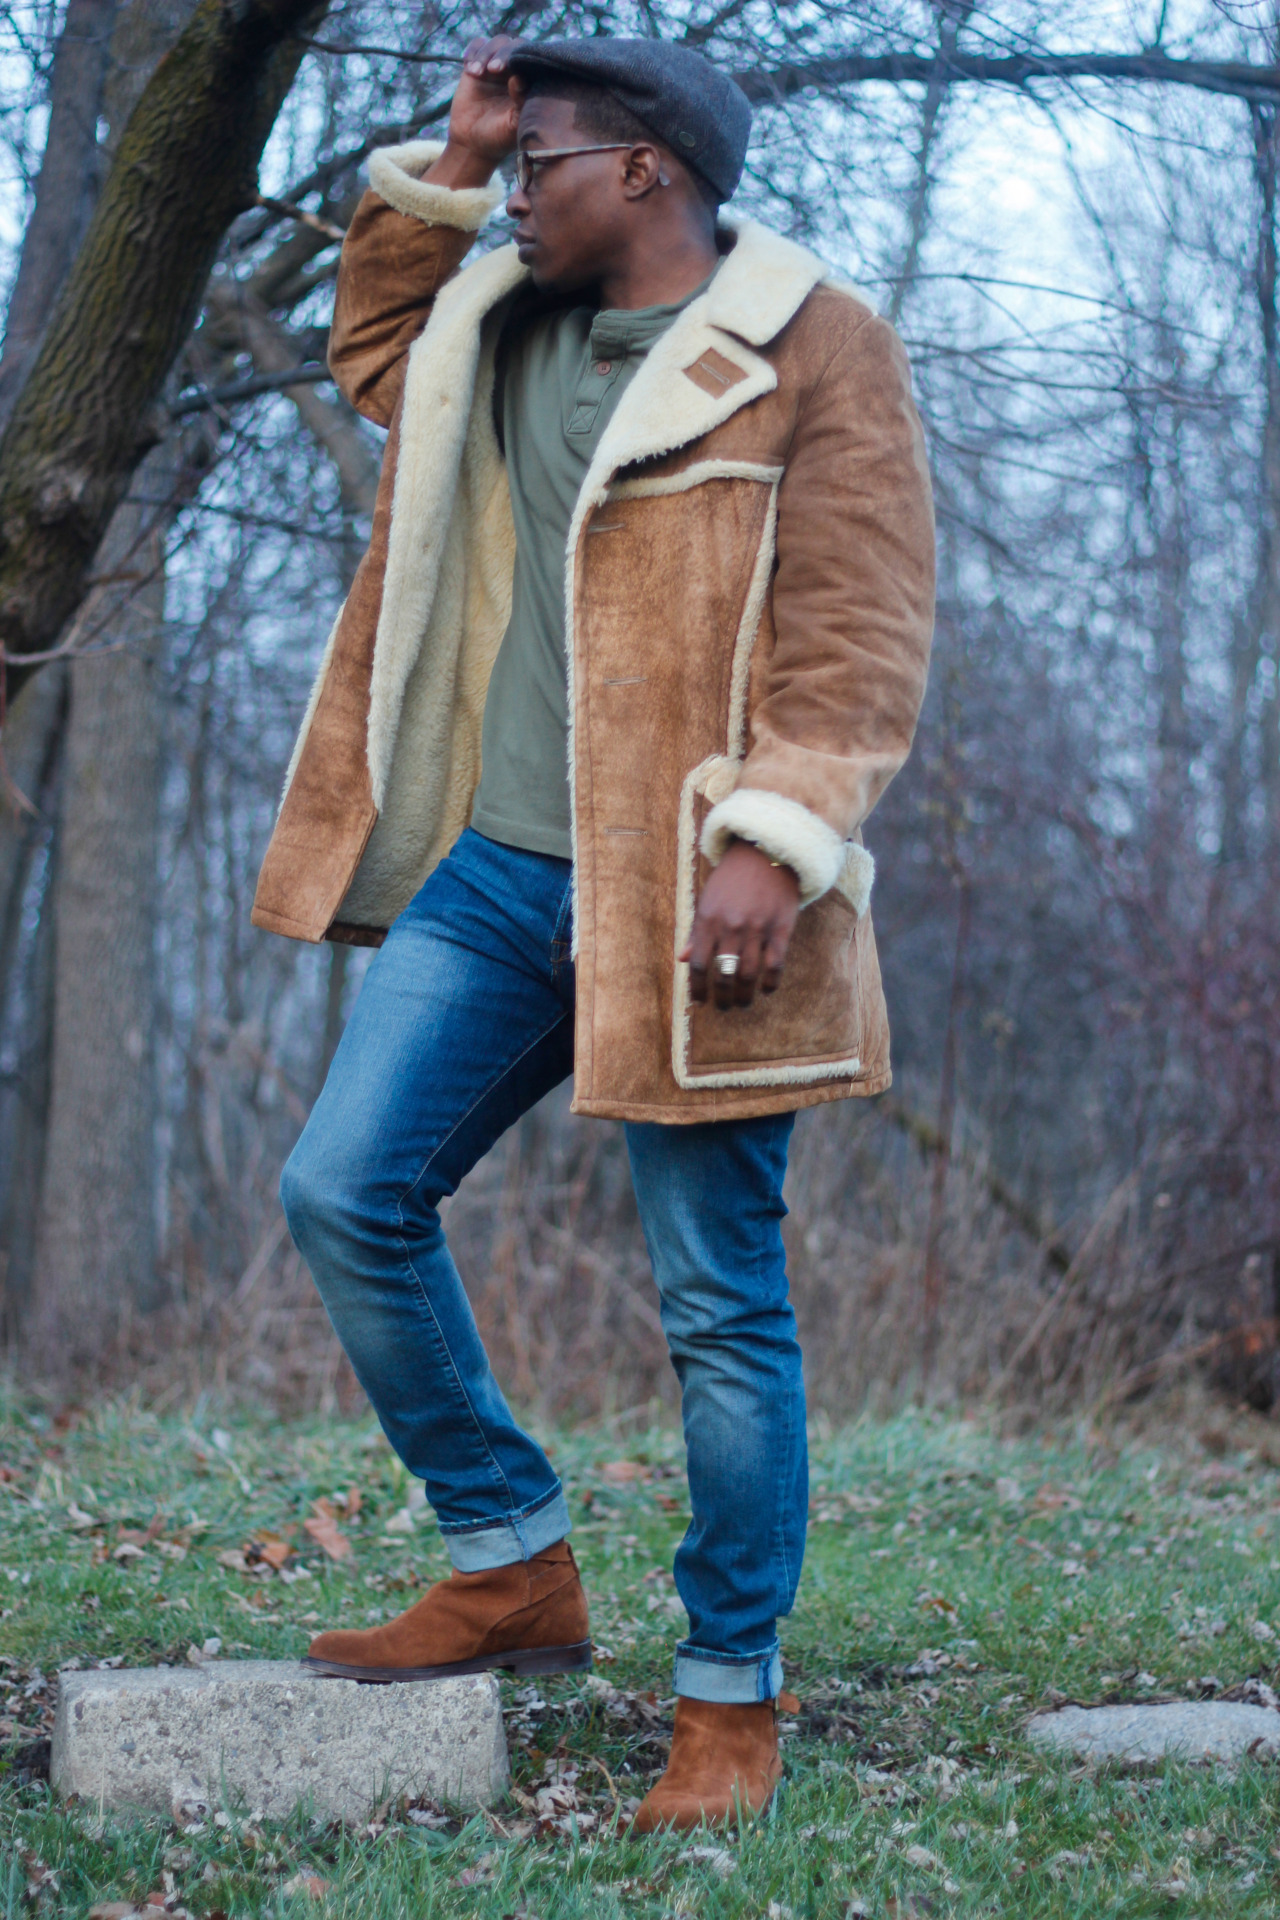 Bring out the Shearling!